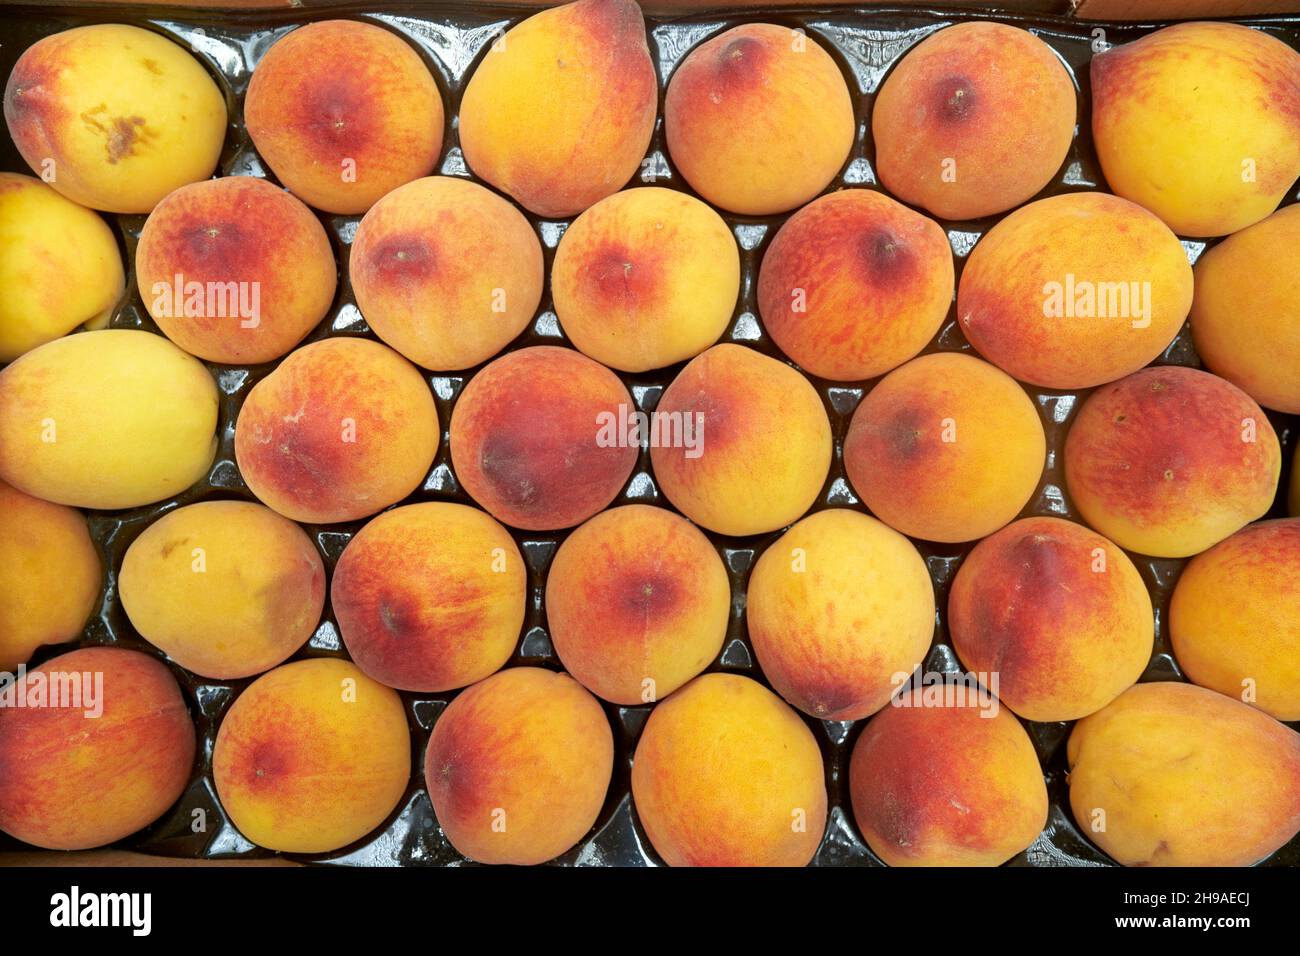 The peach Prunus persica is a deciduous tree native most called peaches and nectarines. Stock Photo